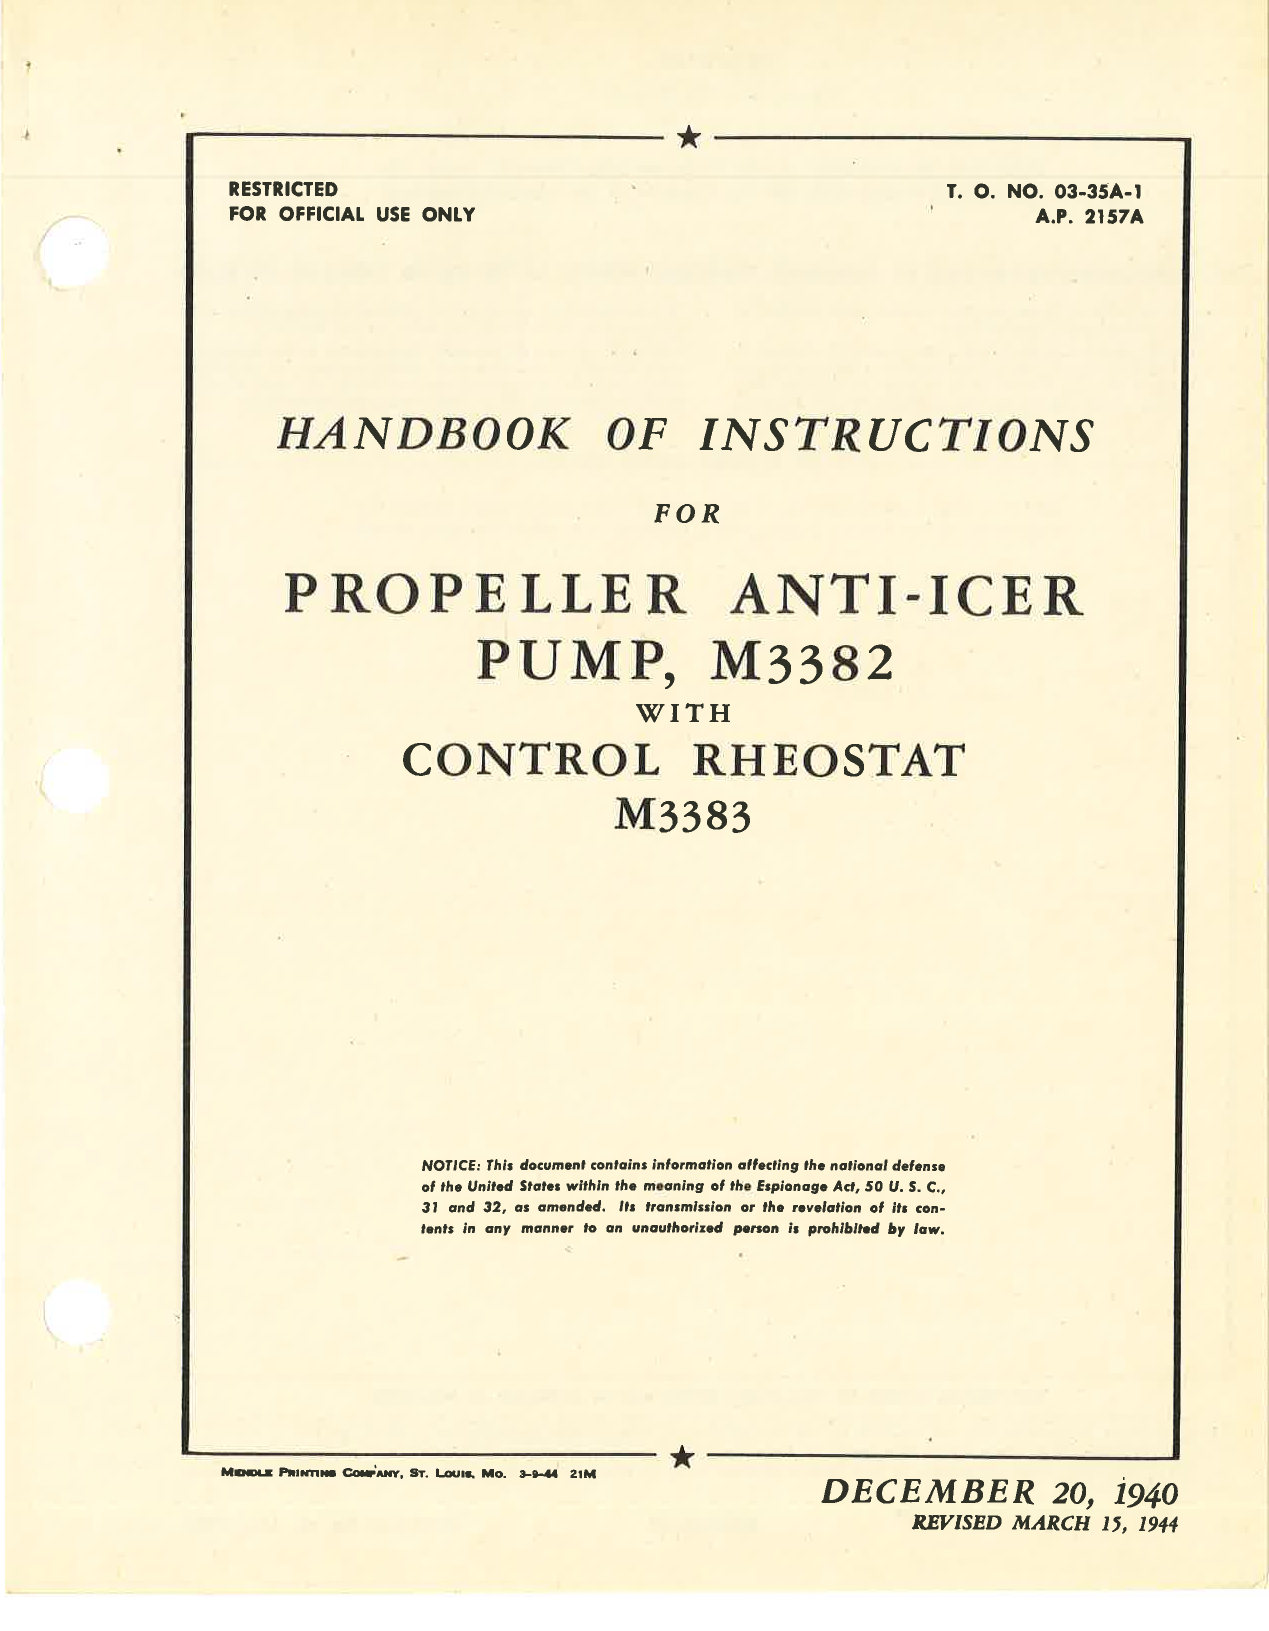 Sample page 3 from AirCorps Library document: Handbook of Instructions for Propeller Anti-Icer Pump, M3382 with Control Rheostat M3383